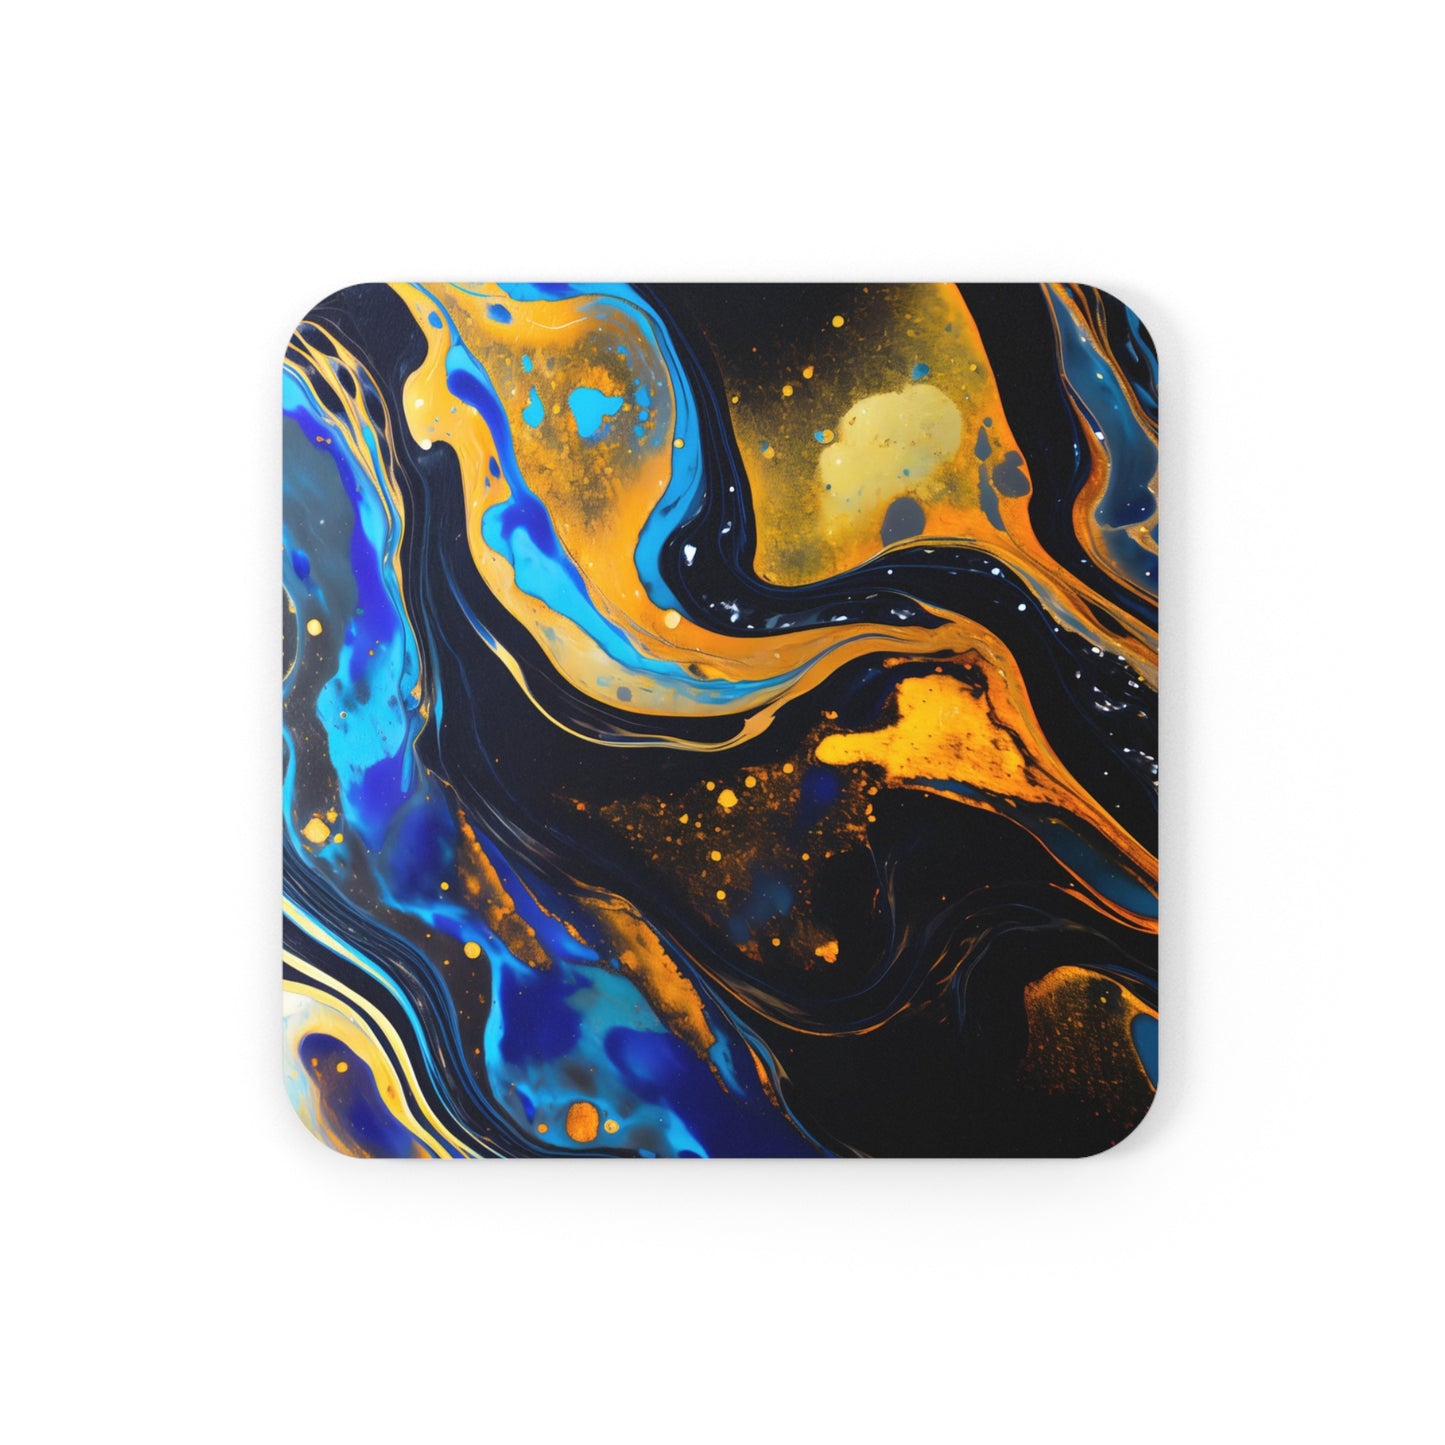 Black and Navy Celestial | Set of 4 Coasters